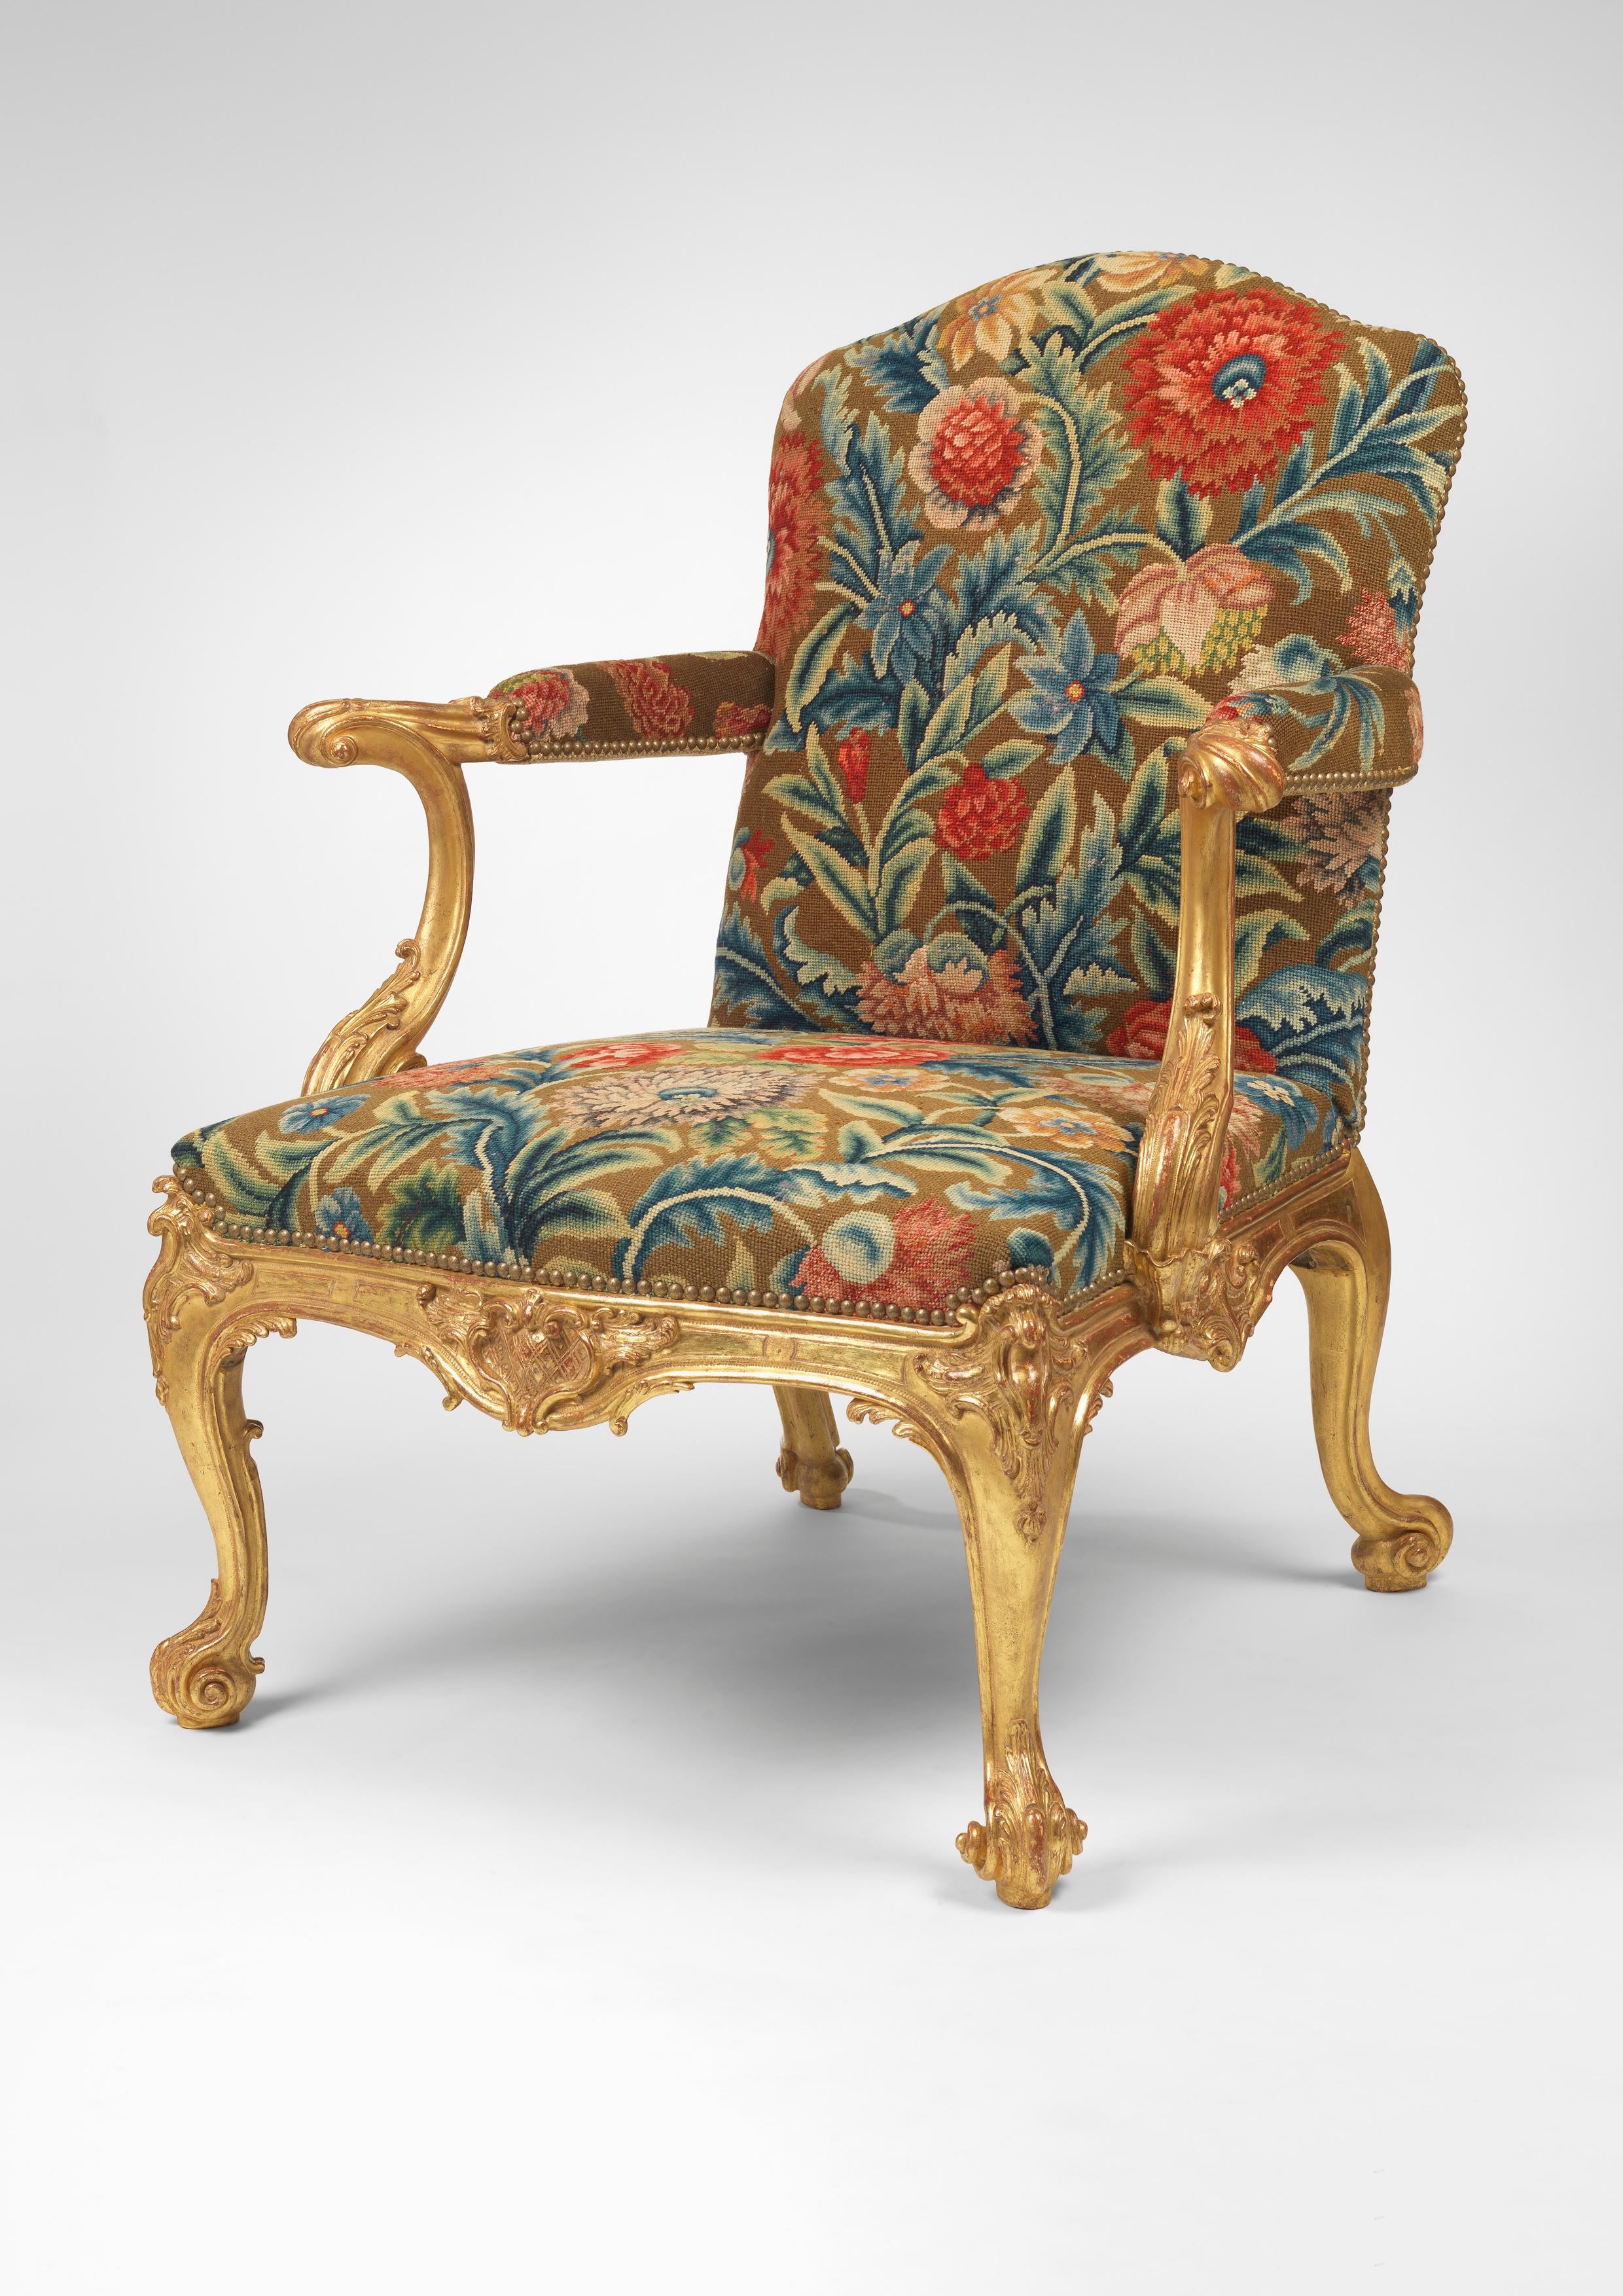 An Important Pair of George II giltwood armchairs in the manner of Thomas Chippendale upholstered in associated 18th century needlework.

The serpentine shaped upholstered backs to elaborate out-scrolling open arms, with serpentine shaped seat